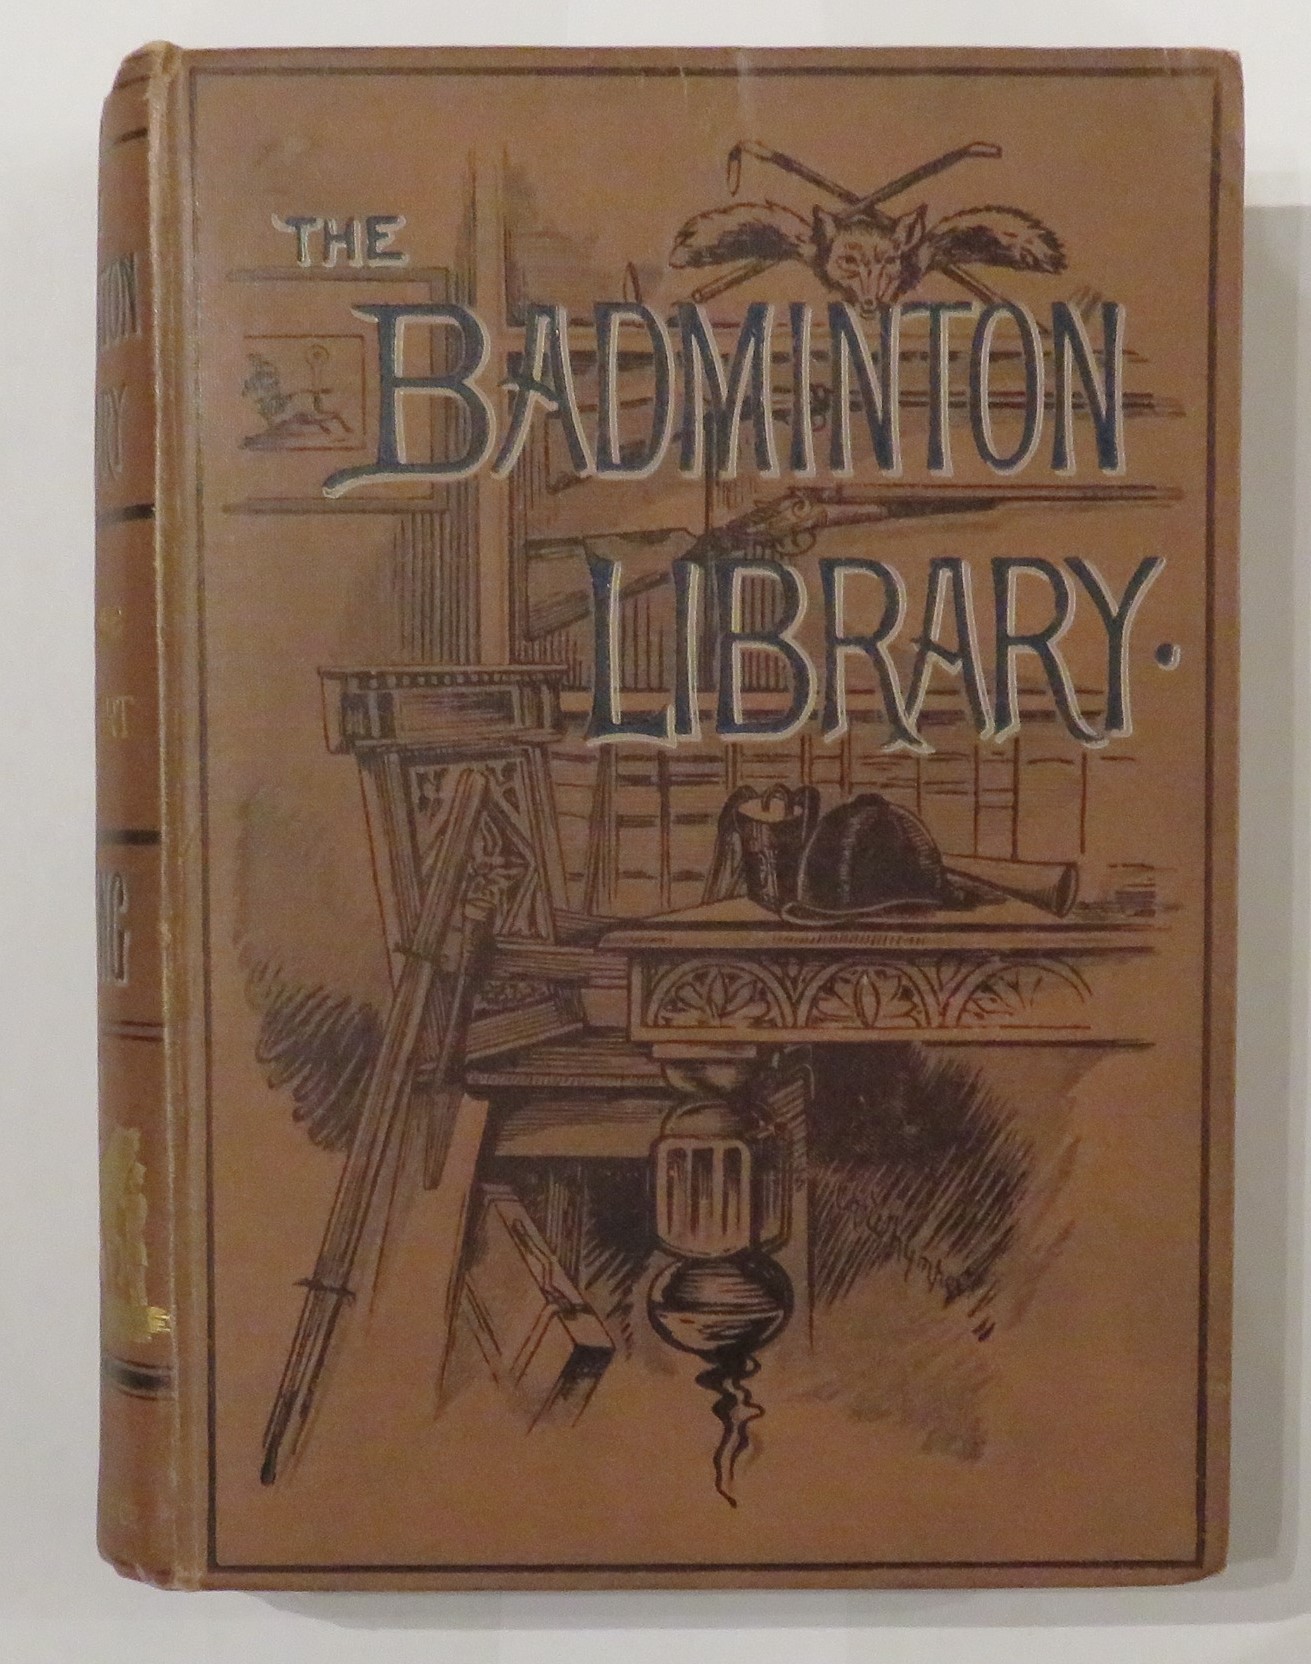 The Badminton Library: Driving